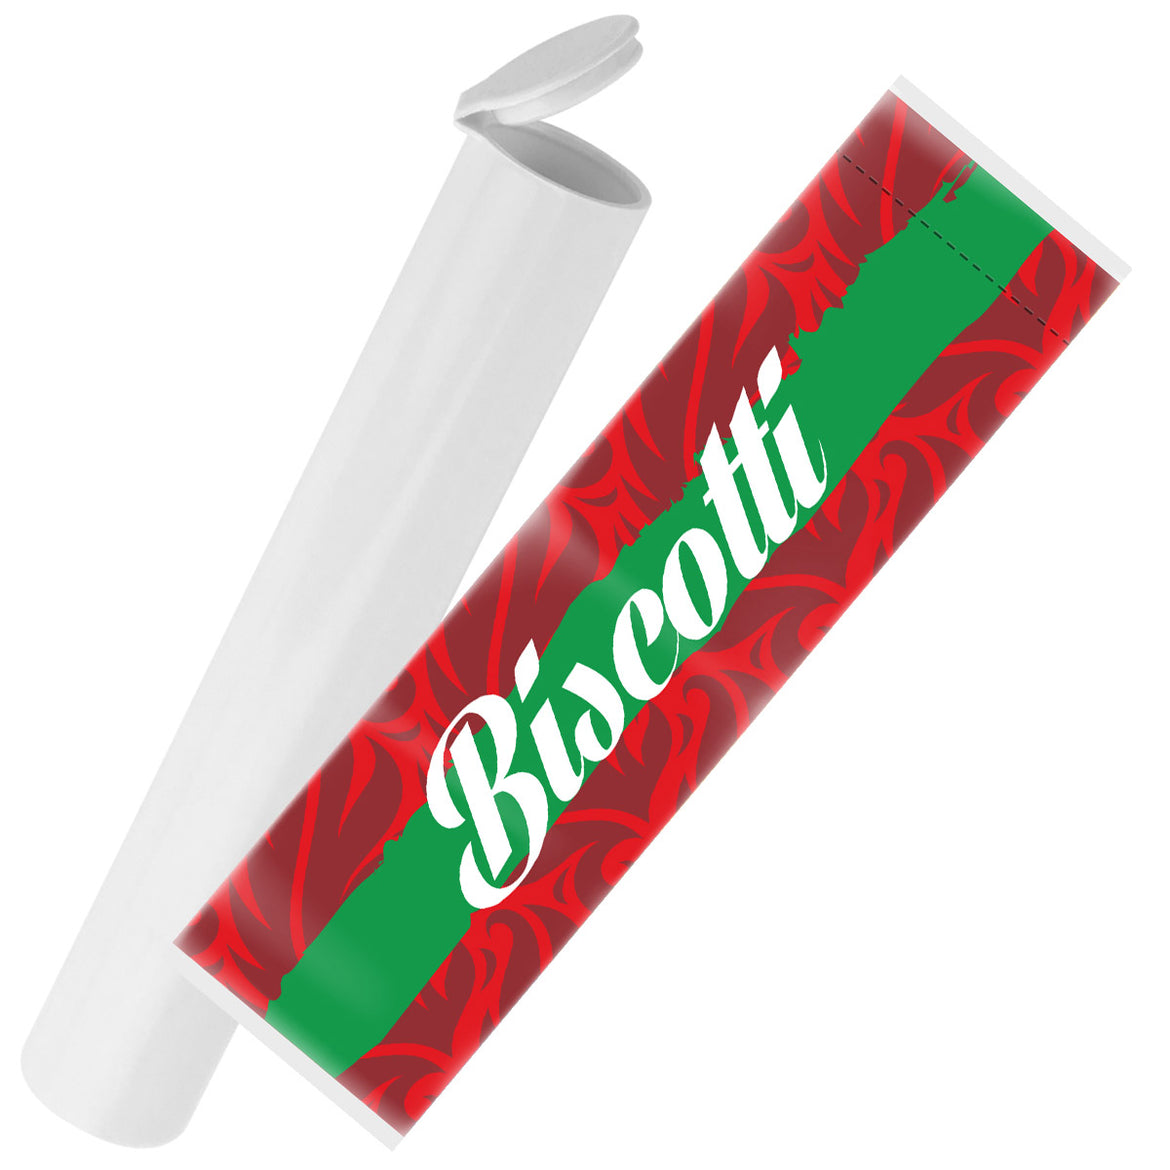 Biscotti Strain Sleeve Labels and Pre Roll Tubes | Free Shipping